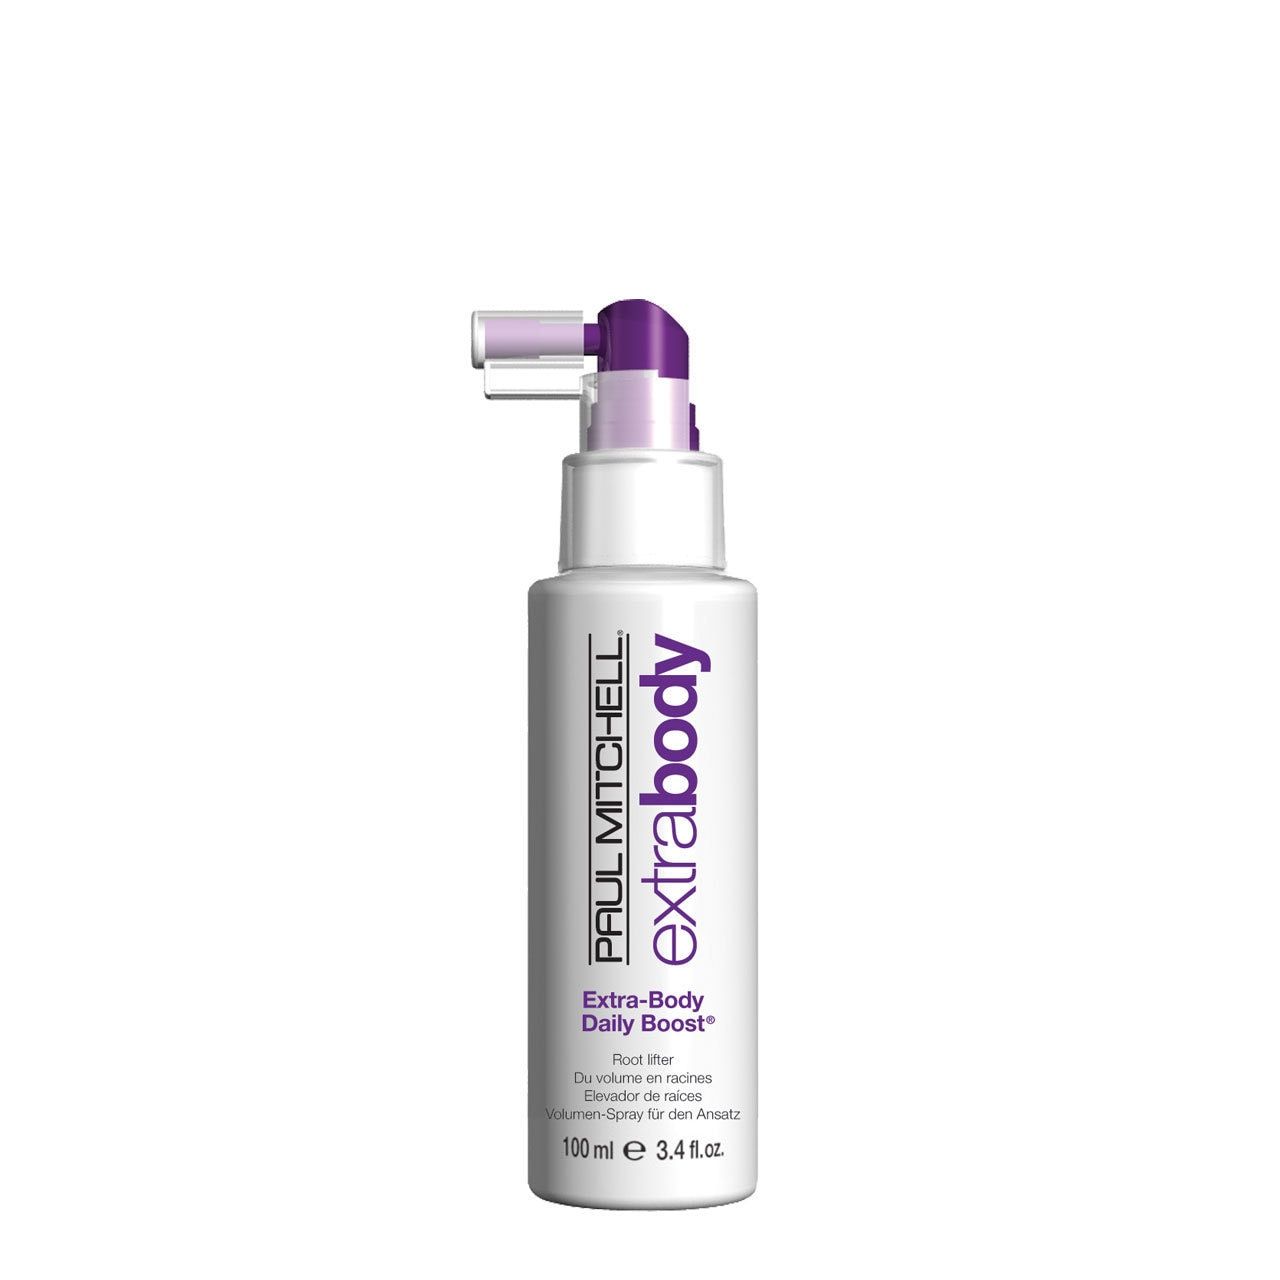 Paul Mitchell Extra-body Daily Boost - 100ml